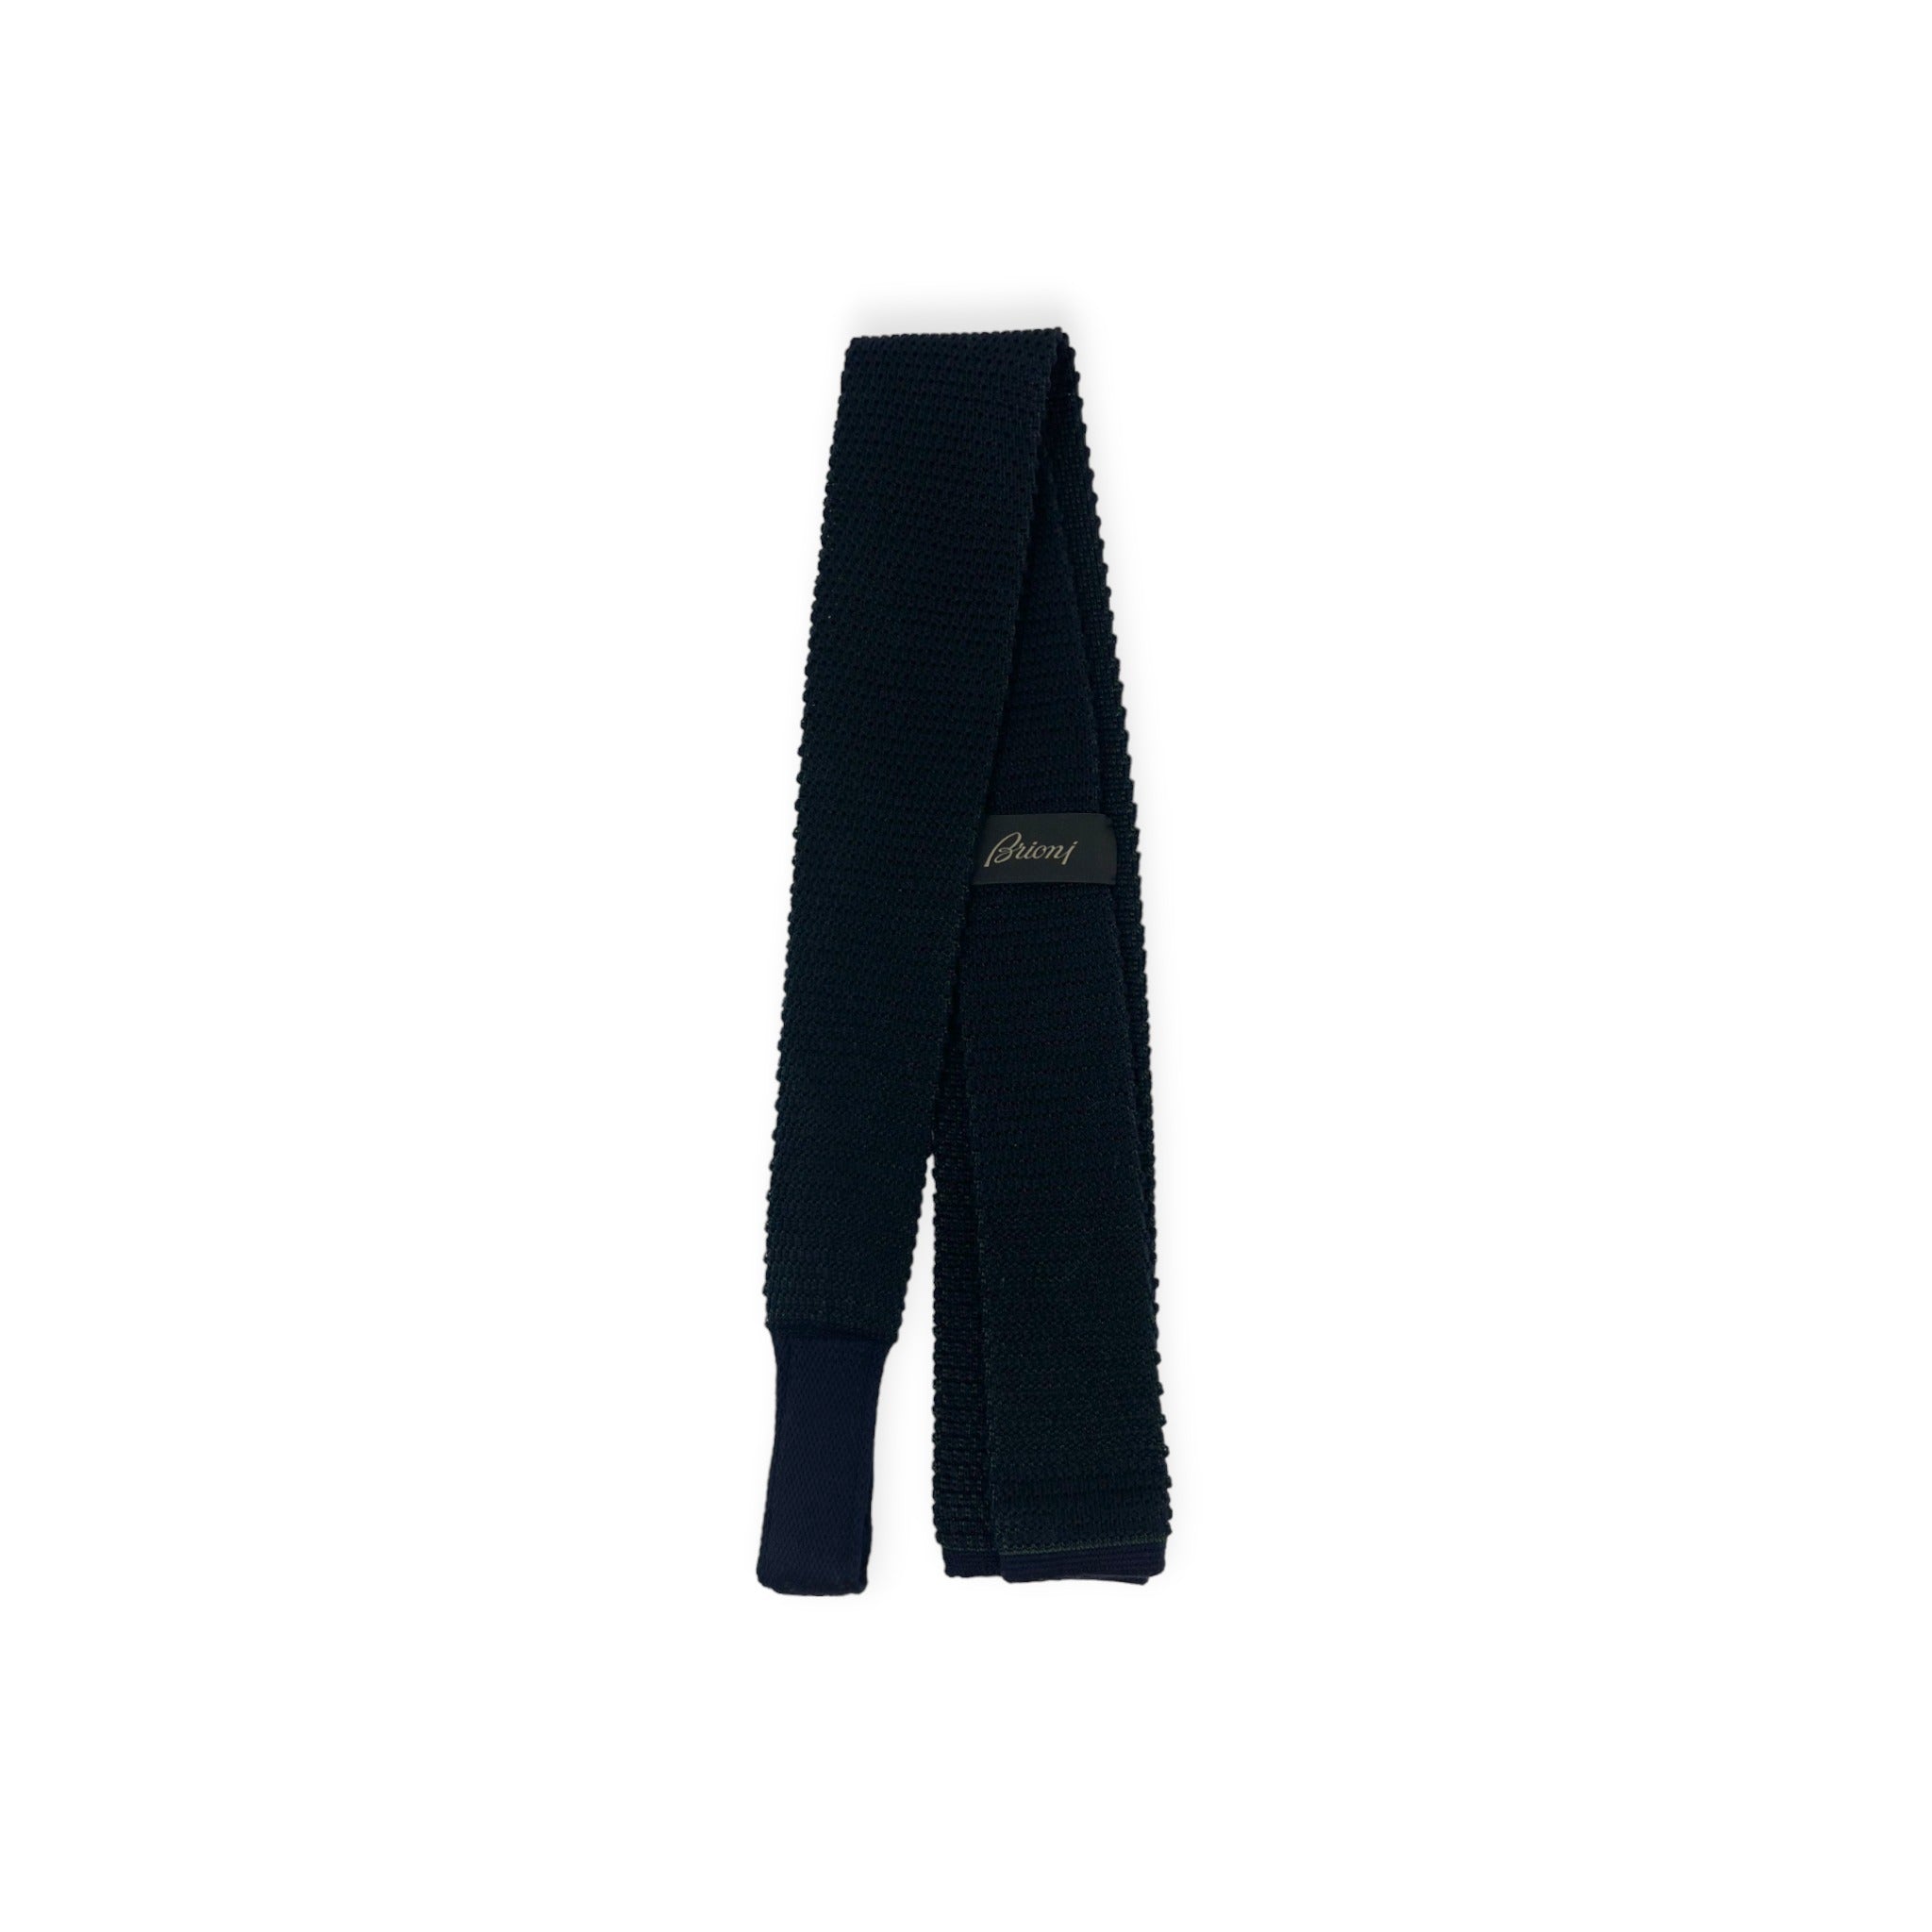 Top down view of the front of black Brioni knit tricot tie